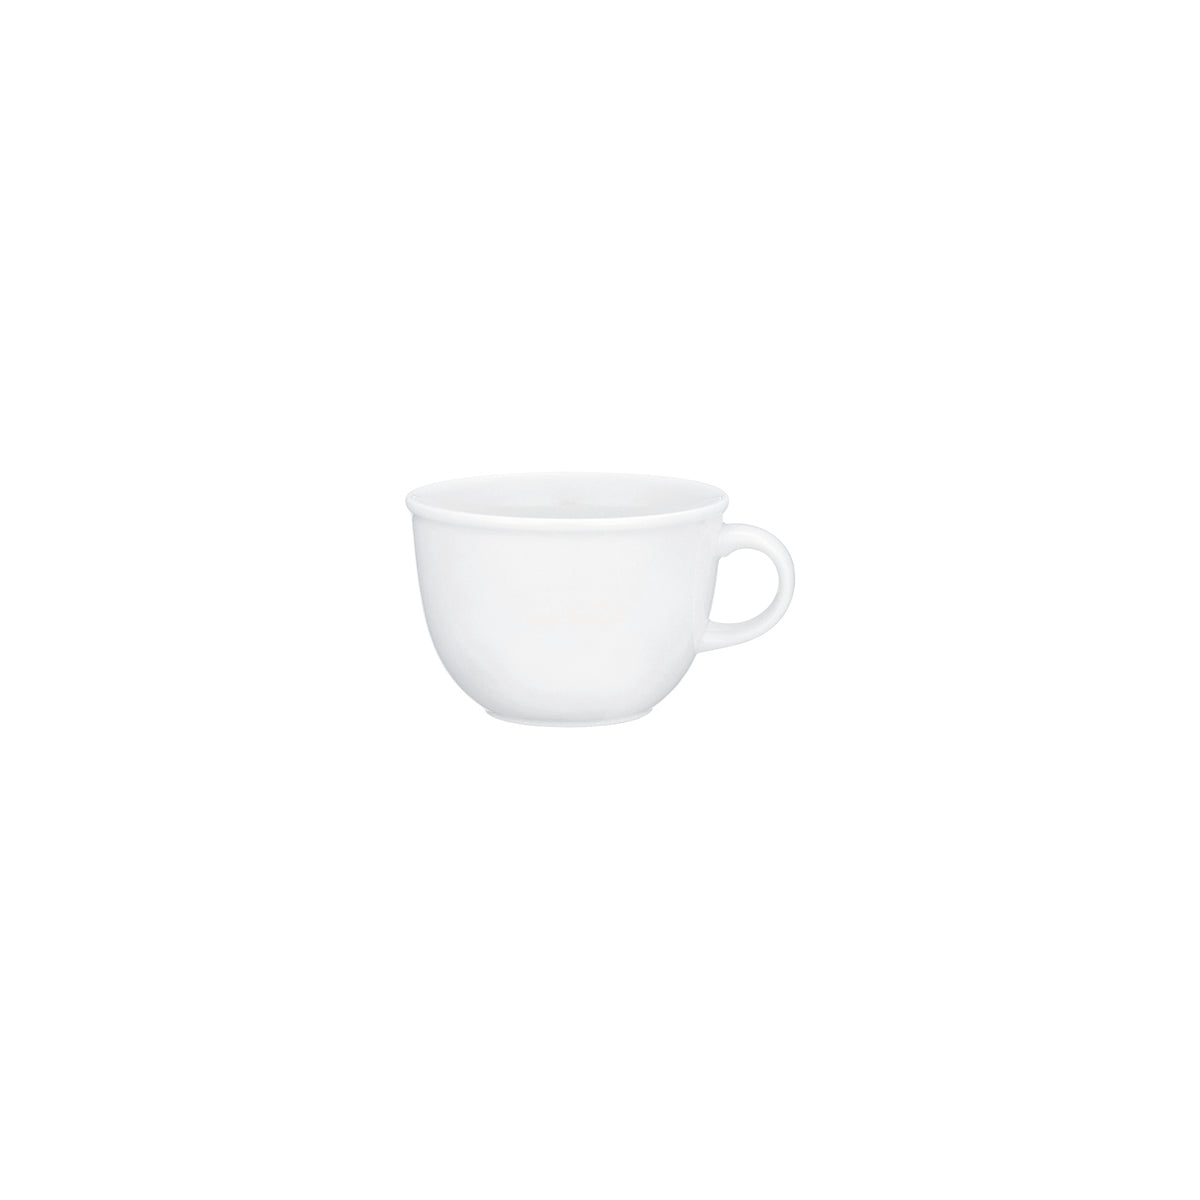 VB16-2016-1450 Villeroy And Boch Villeroy And Boch Corpo White Cup No. 8 100ml Tomkin Australia Hospitality Supplies